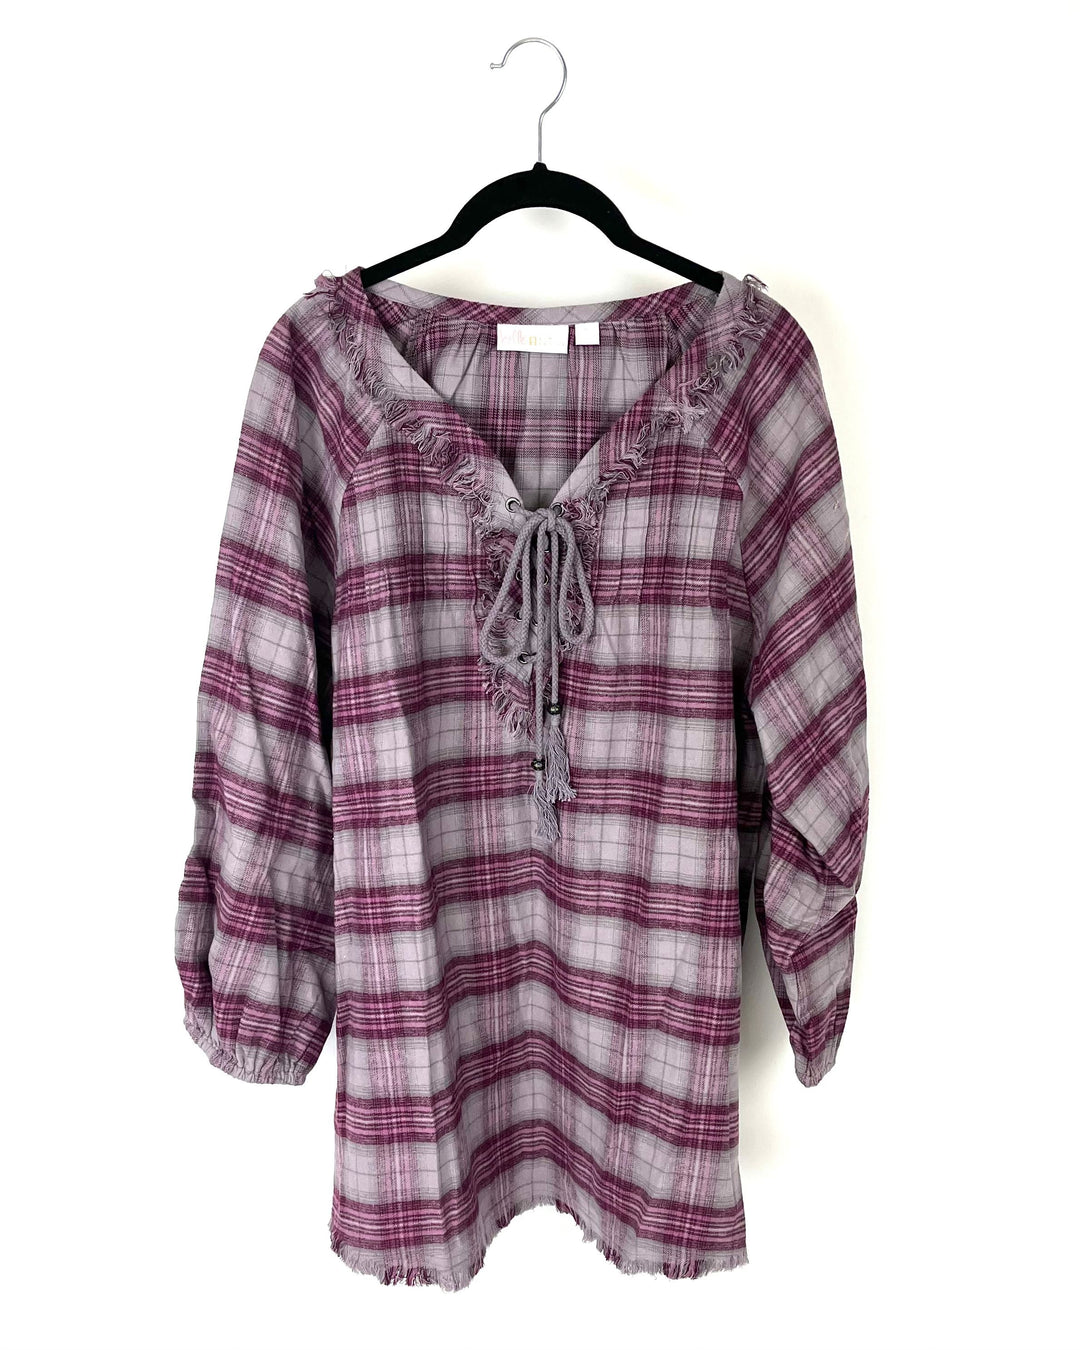 Pink and Gray Flannel Top - Size 10-12